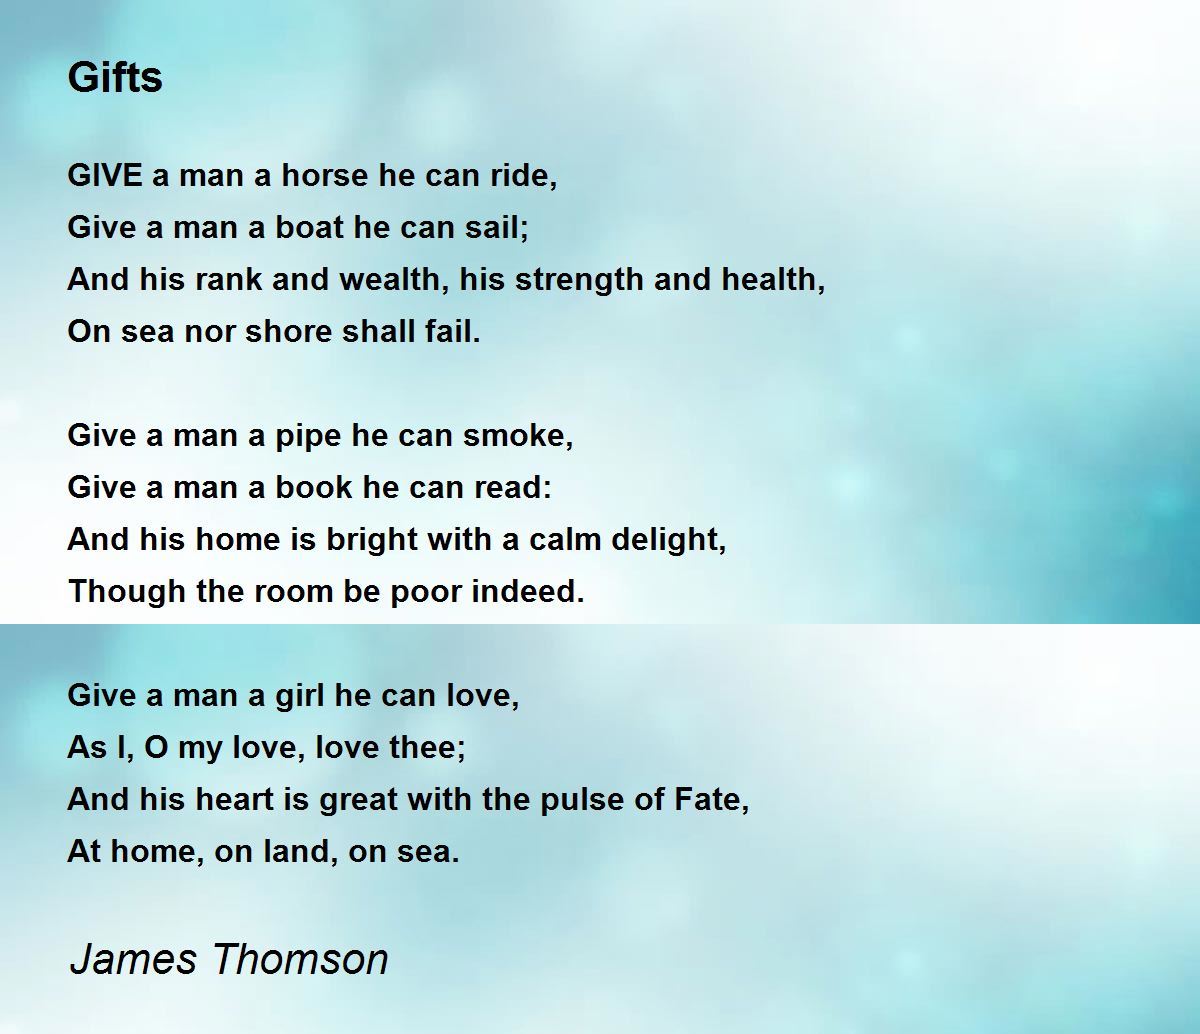 Gifts by James Thomson - Gifts Poem